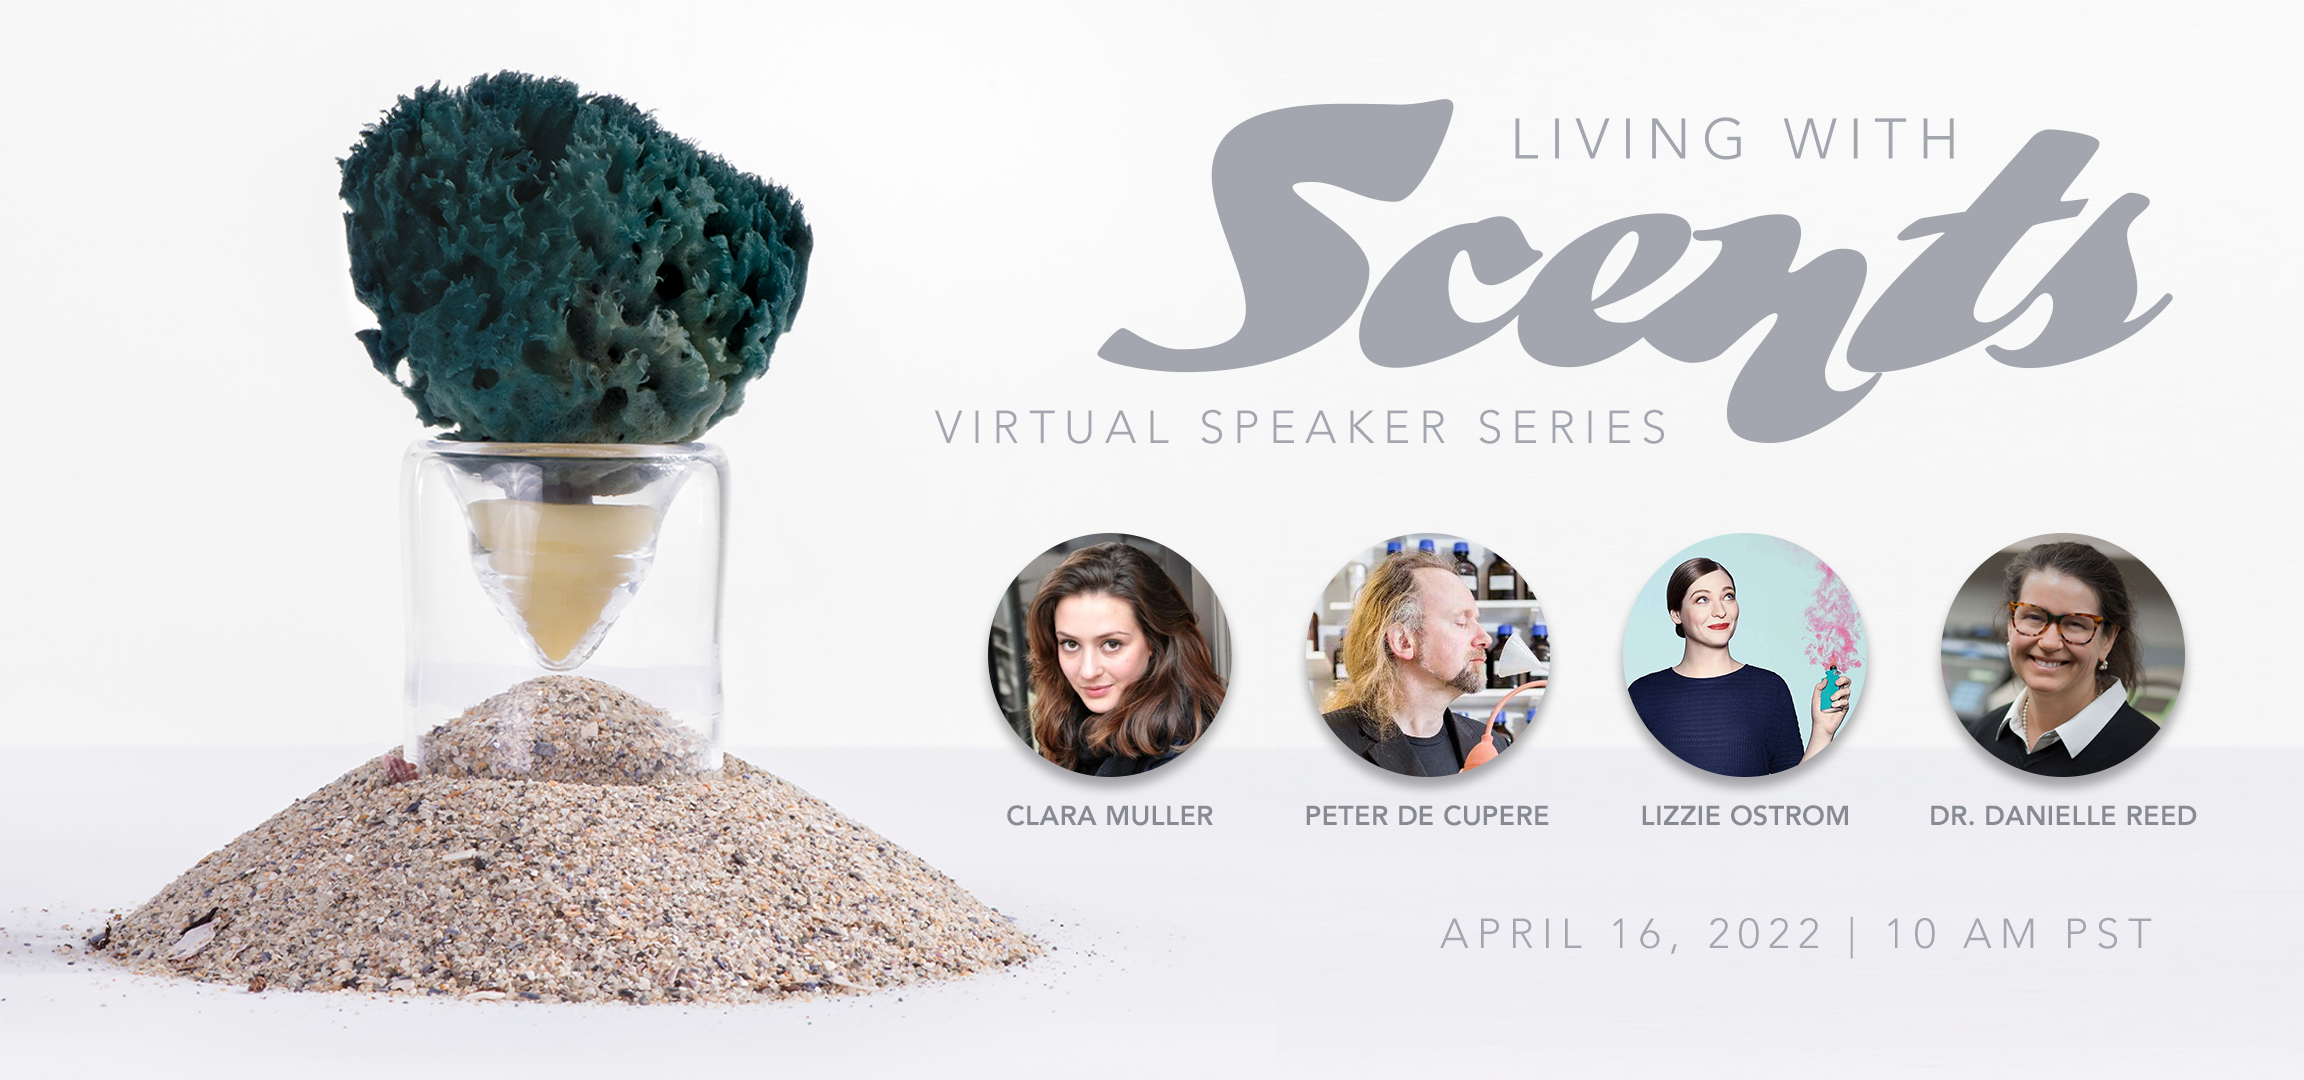 Graphic for panel talk with four headshots and "living with scents" banner